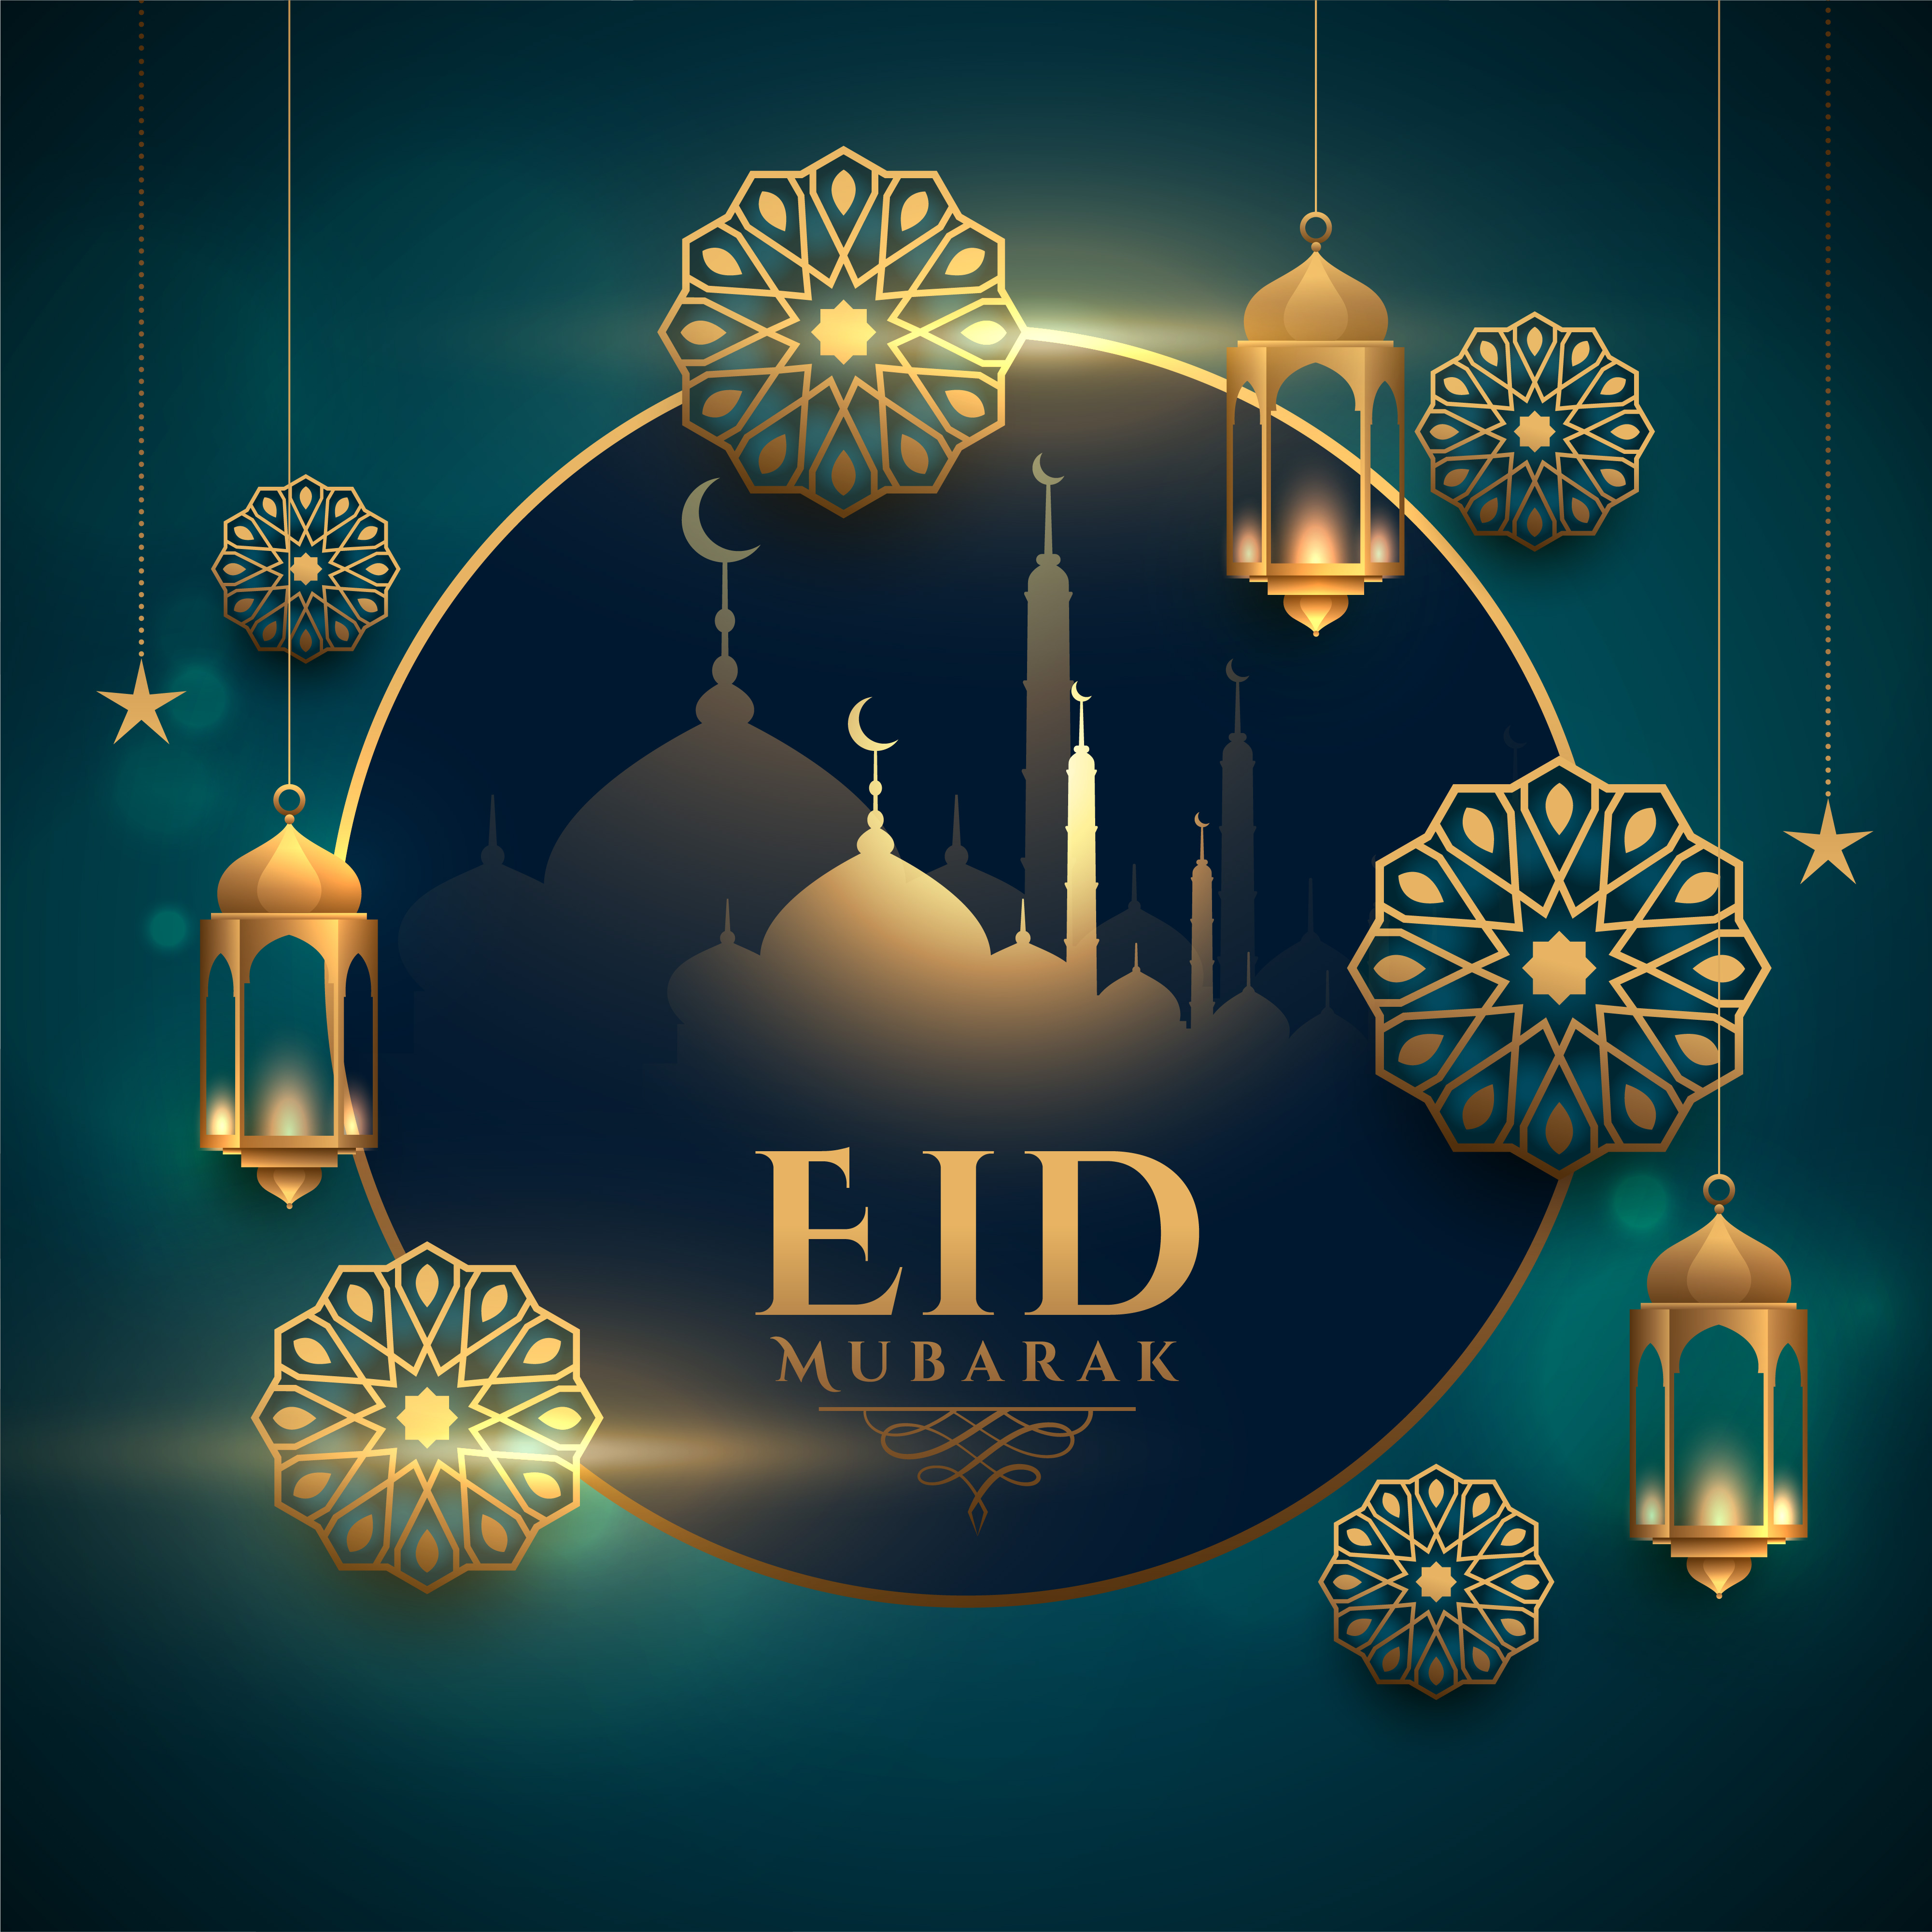 let-s-talk-about-the-holy-month-of-ramadan-and-the-festival-of-eid